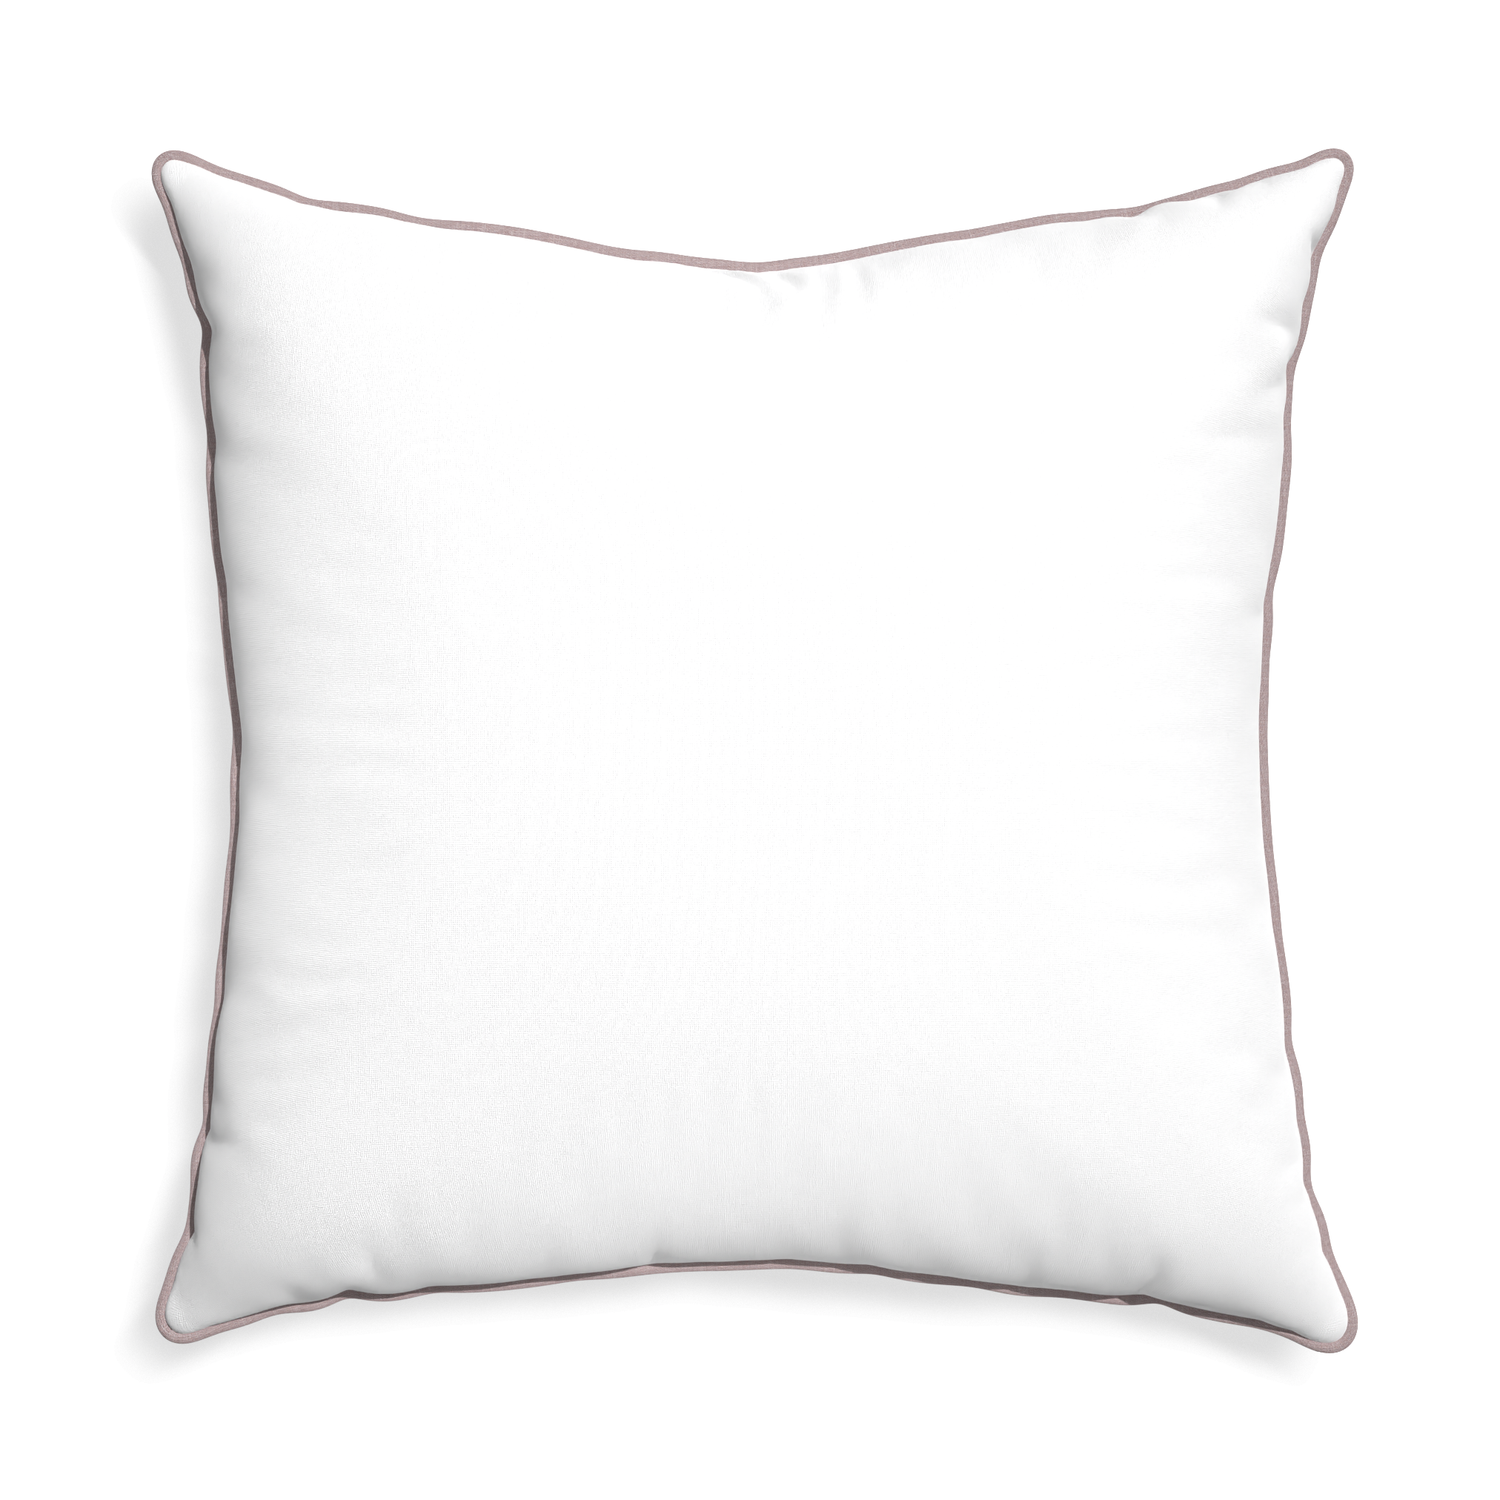 Euro-sham snow custom white cottonpillow with orchid piping on white background